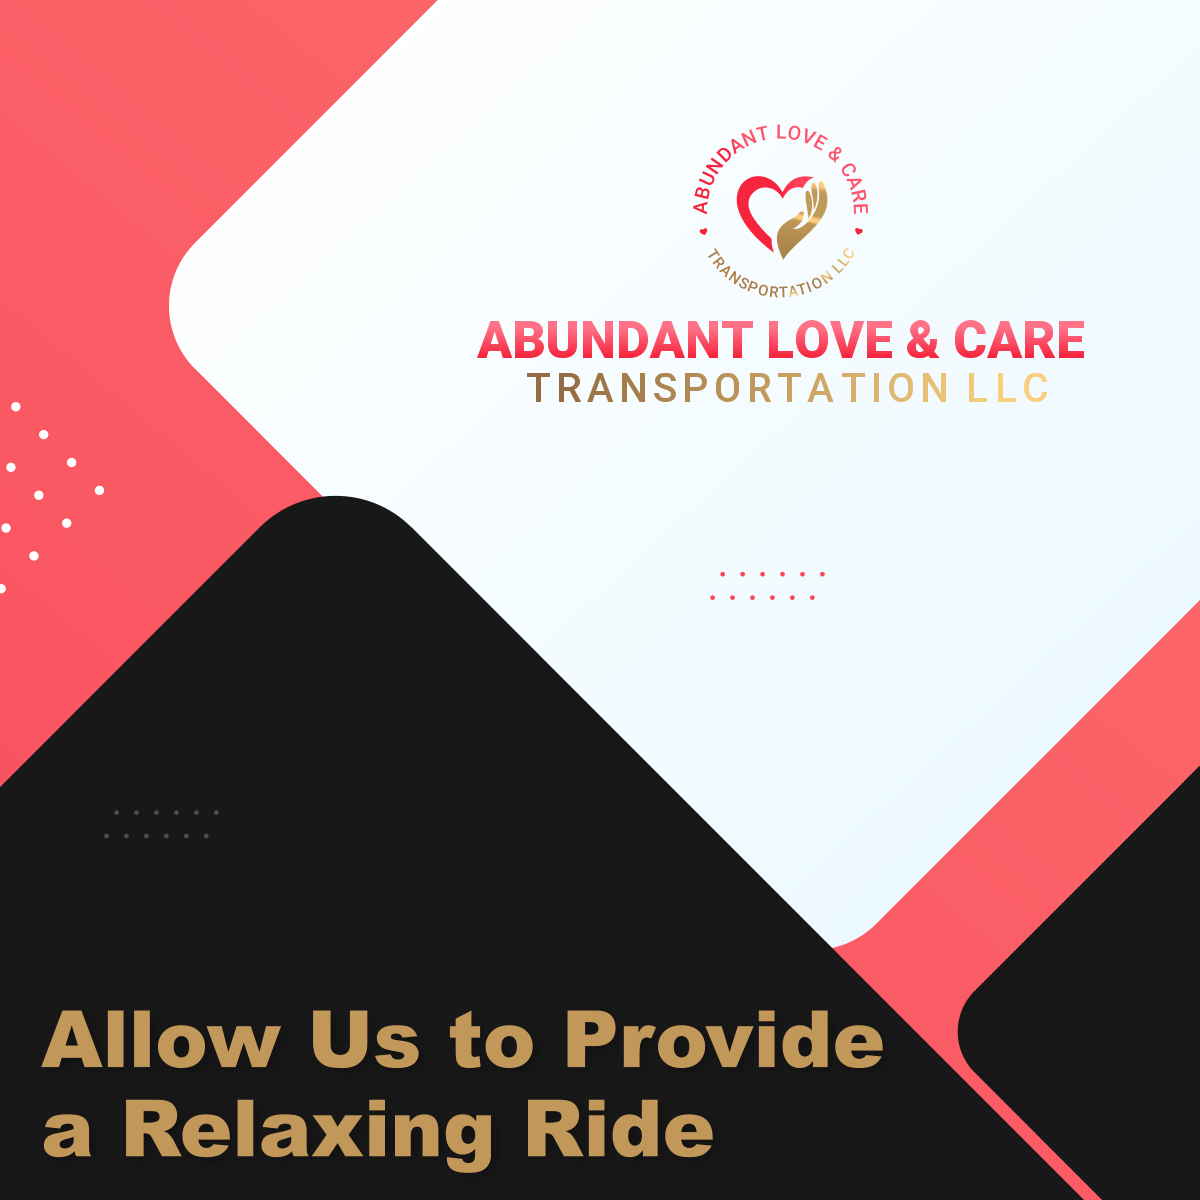 We can gladly assist your loved ones if they have a disability. We can provide a ride for your loved ones to avoid the stress of public transit. We can carry them to their location safely...

Read more:
facebook.com/abundantlactll…

#TransportationServices #RelaxingRide